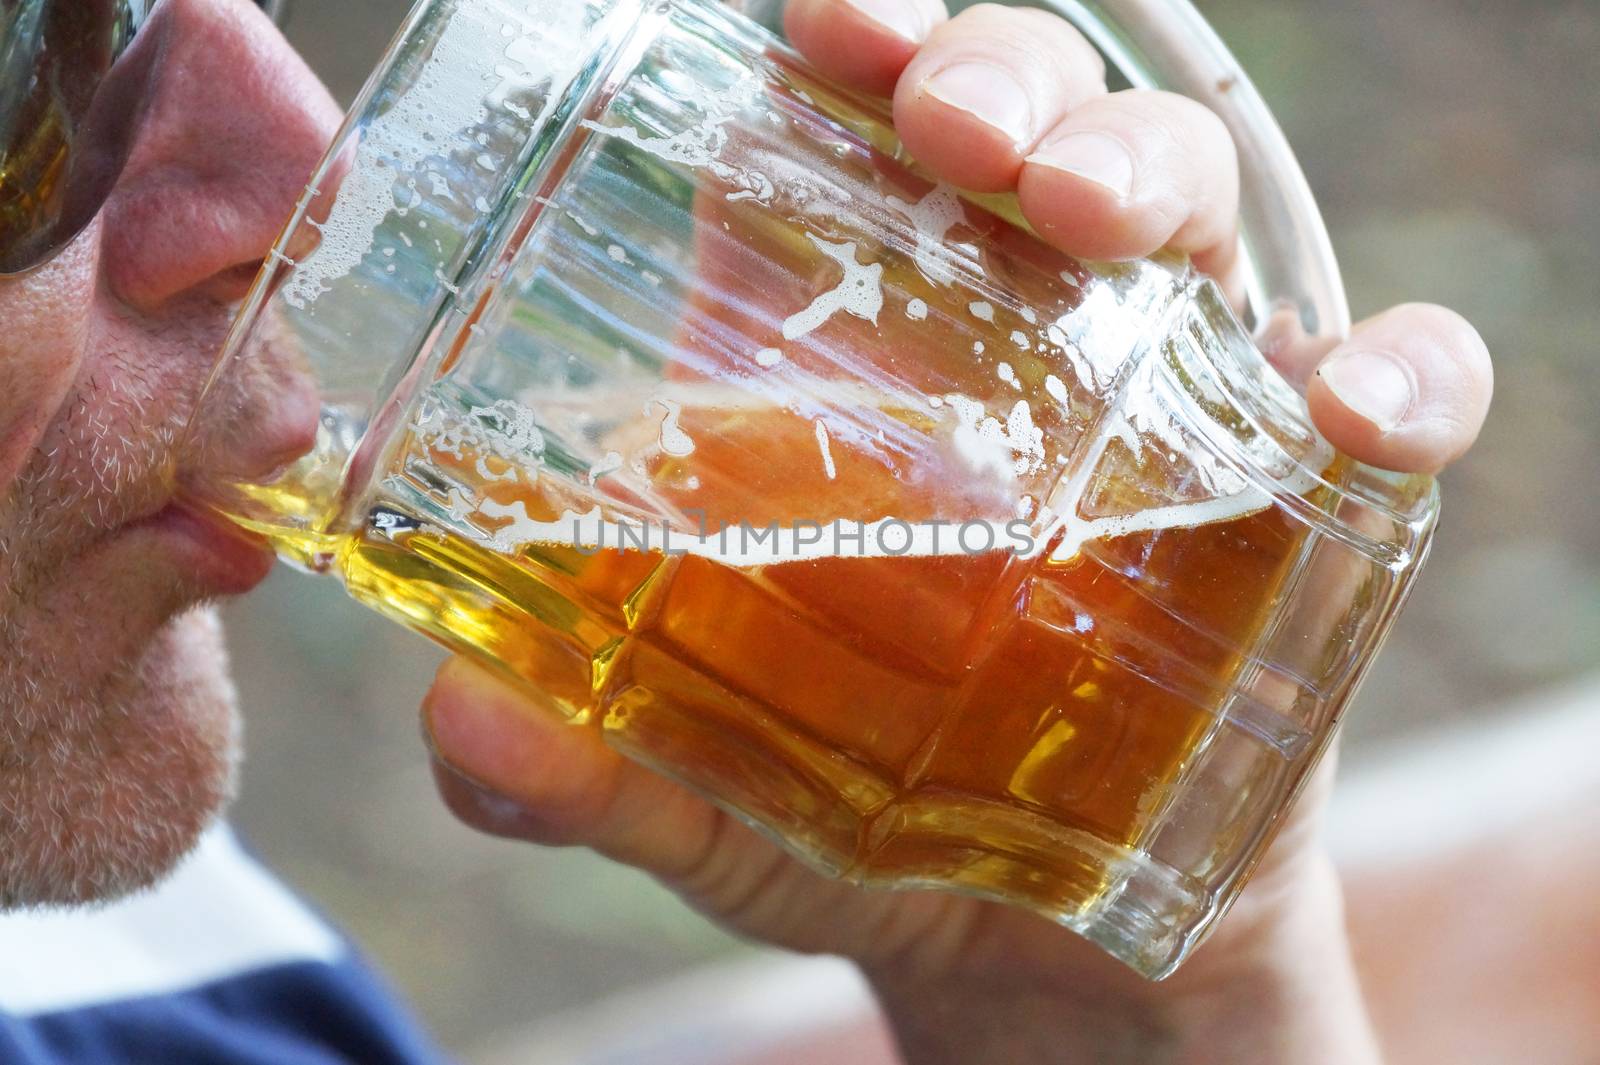 man drinks beer from a large glass mug in nature by Annado